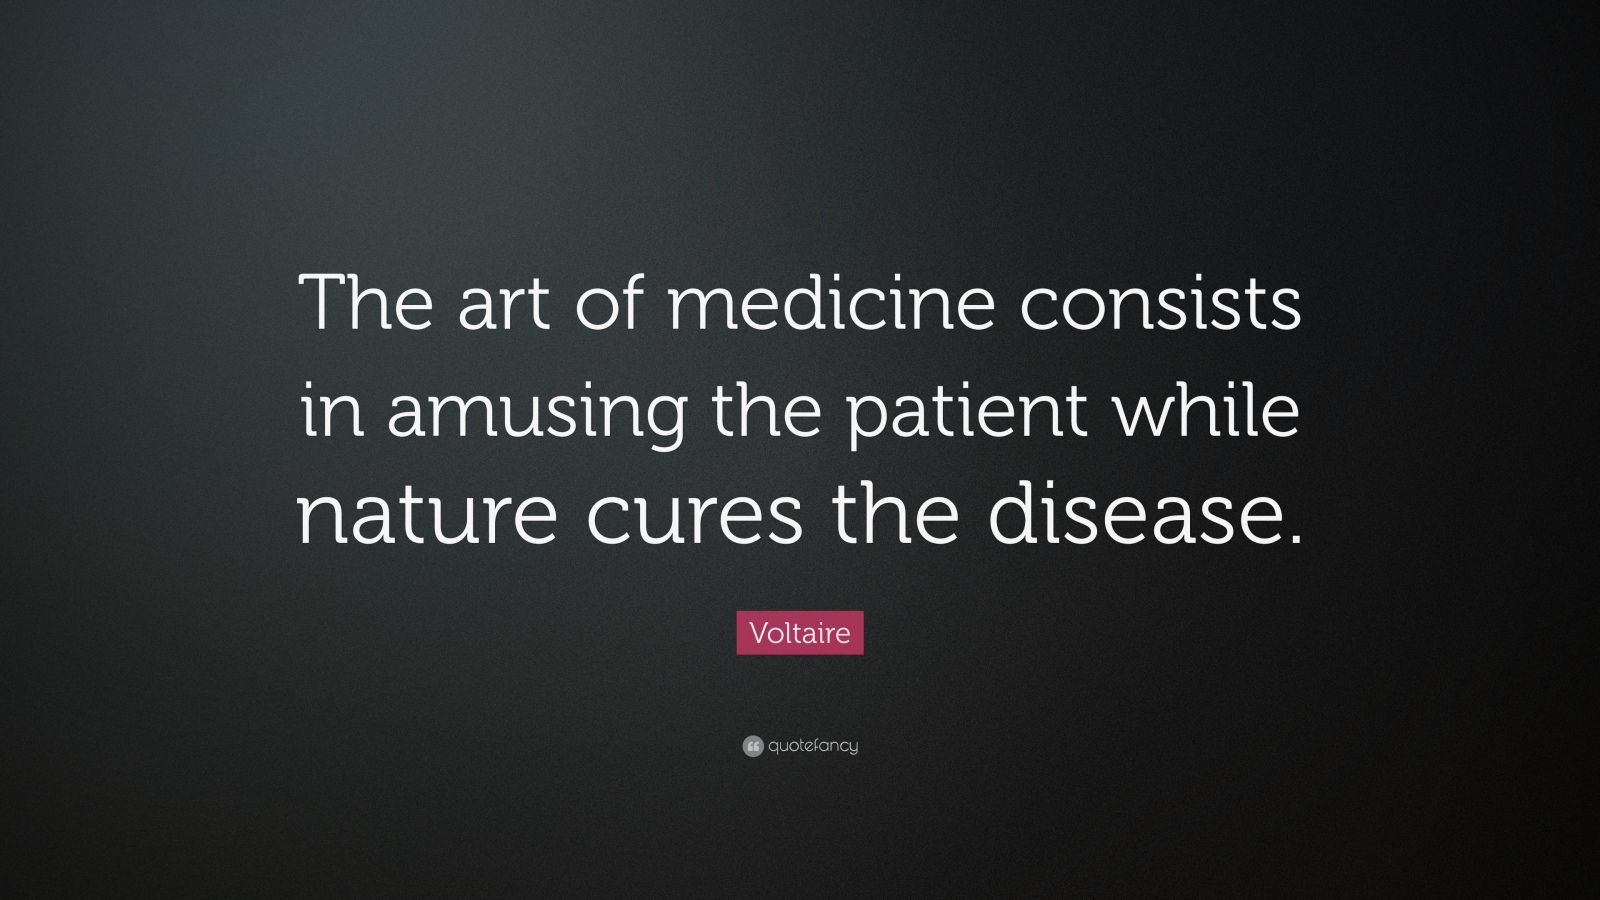 Voltaire Quote “The art of medicine consists in amusing